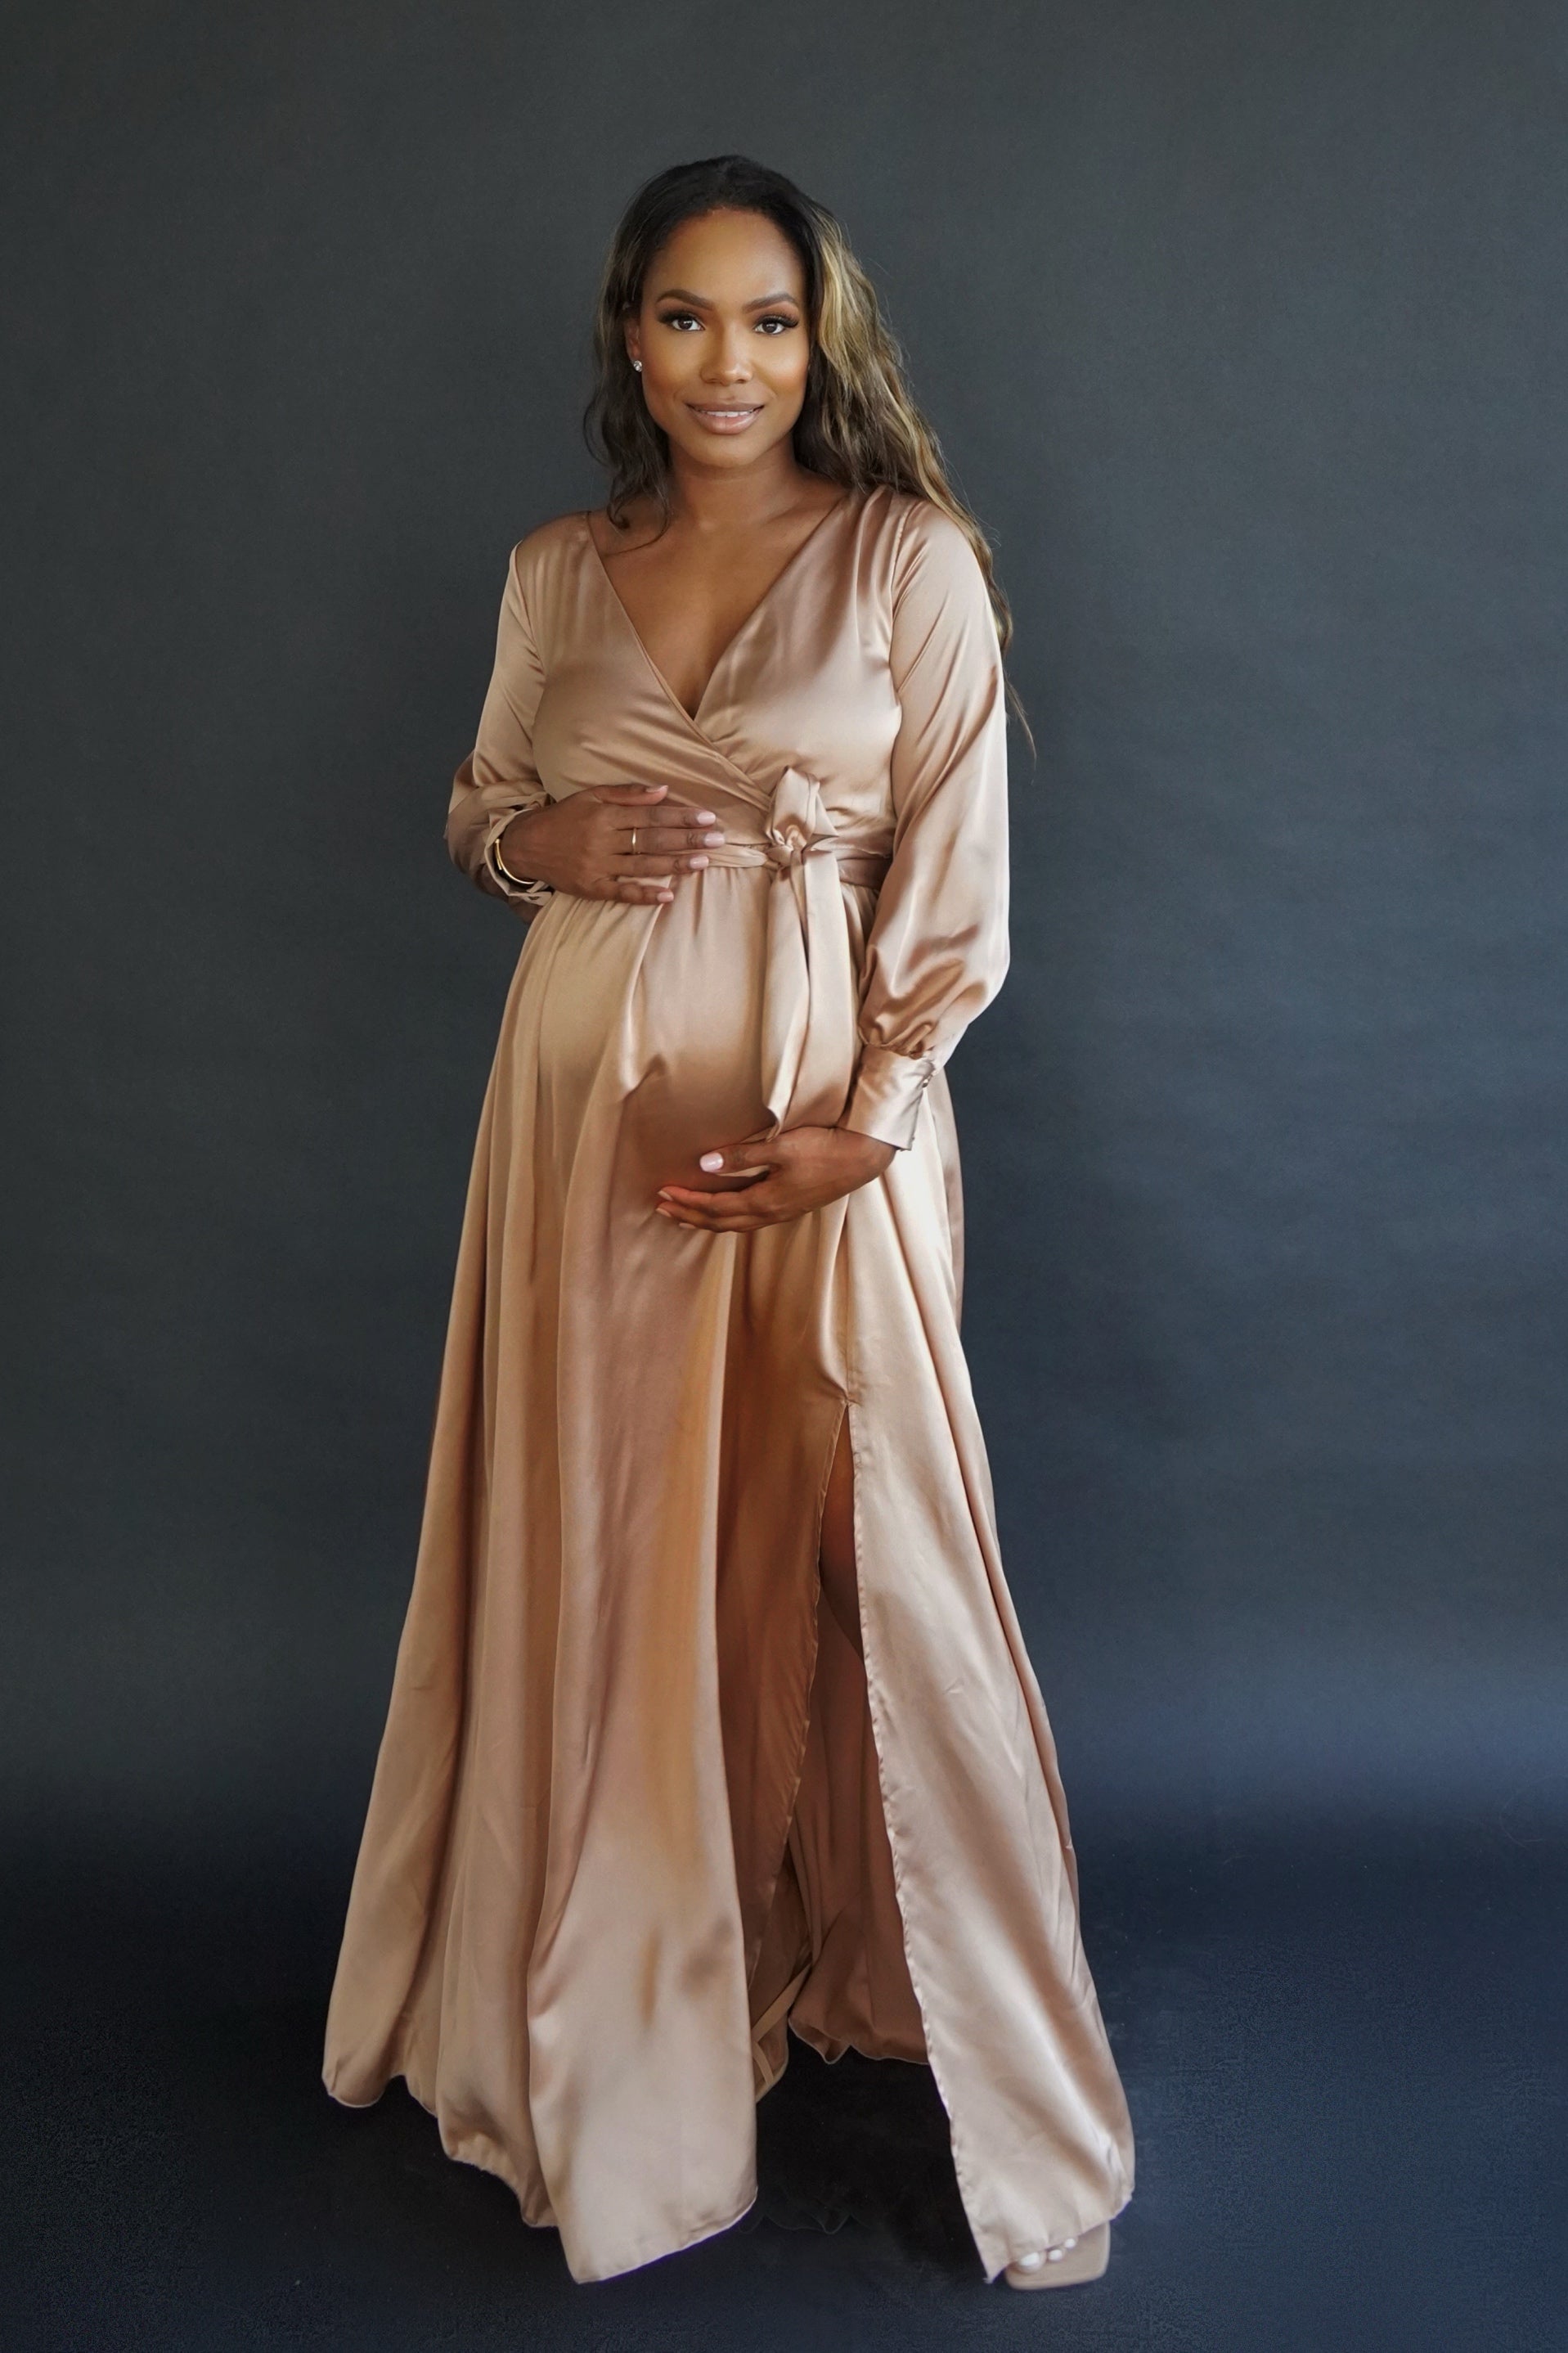 Pink Maternity Dress Maternity Gown Baby Shower Dress Pregnancy